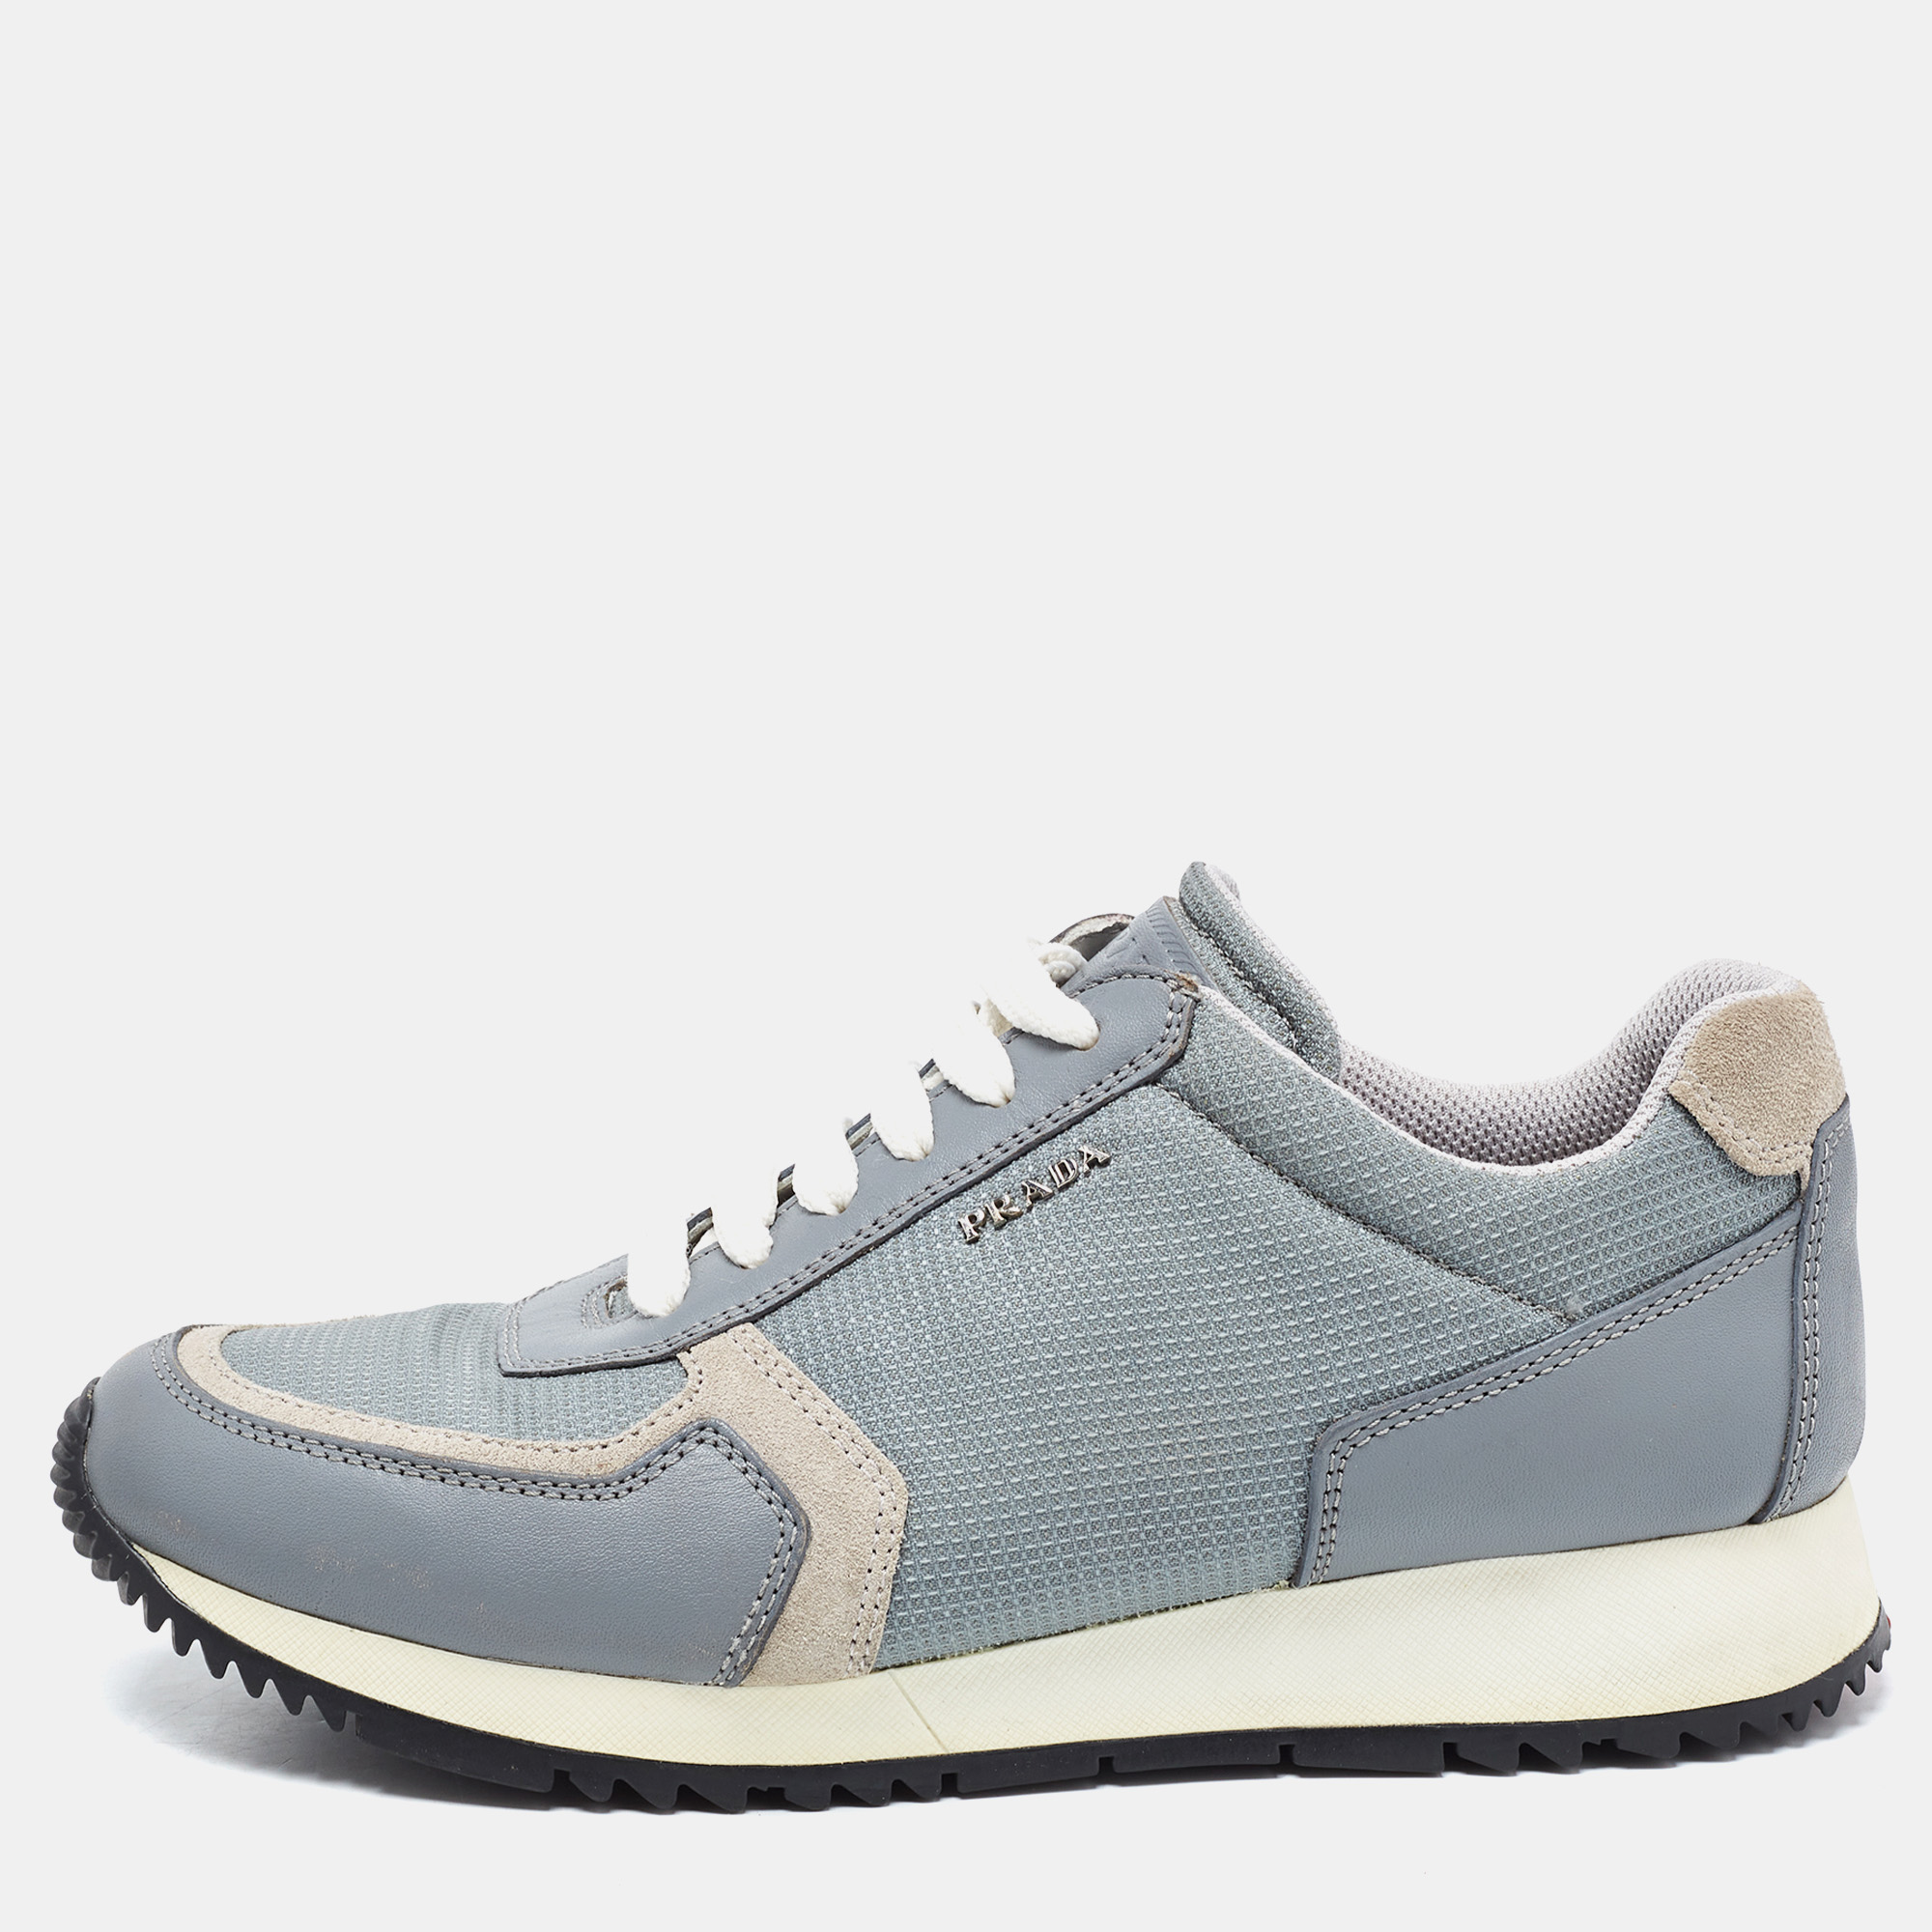 Prada Grey Mesh And Leather Low Top Sneakers Size 37.5